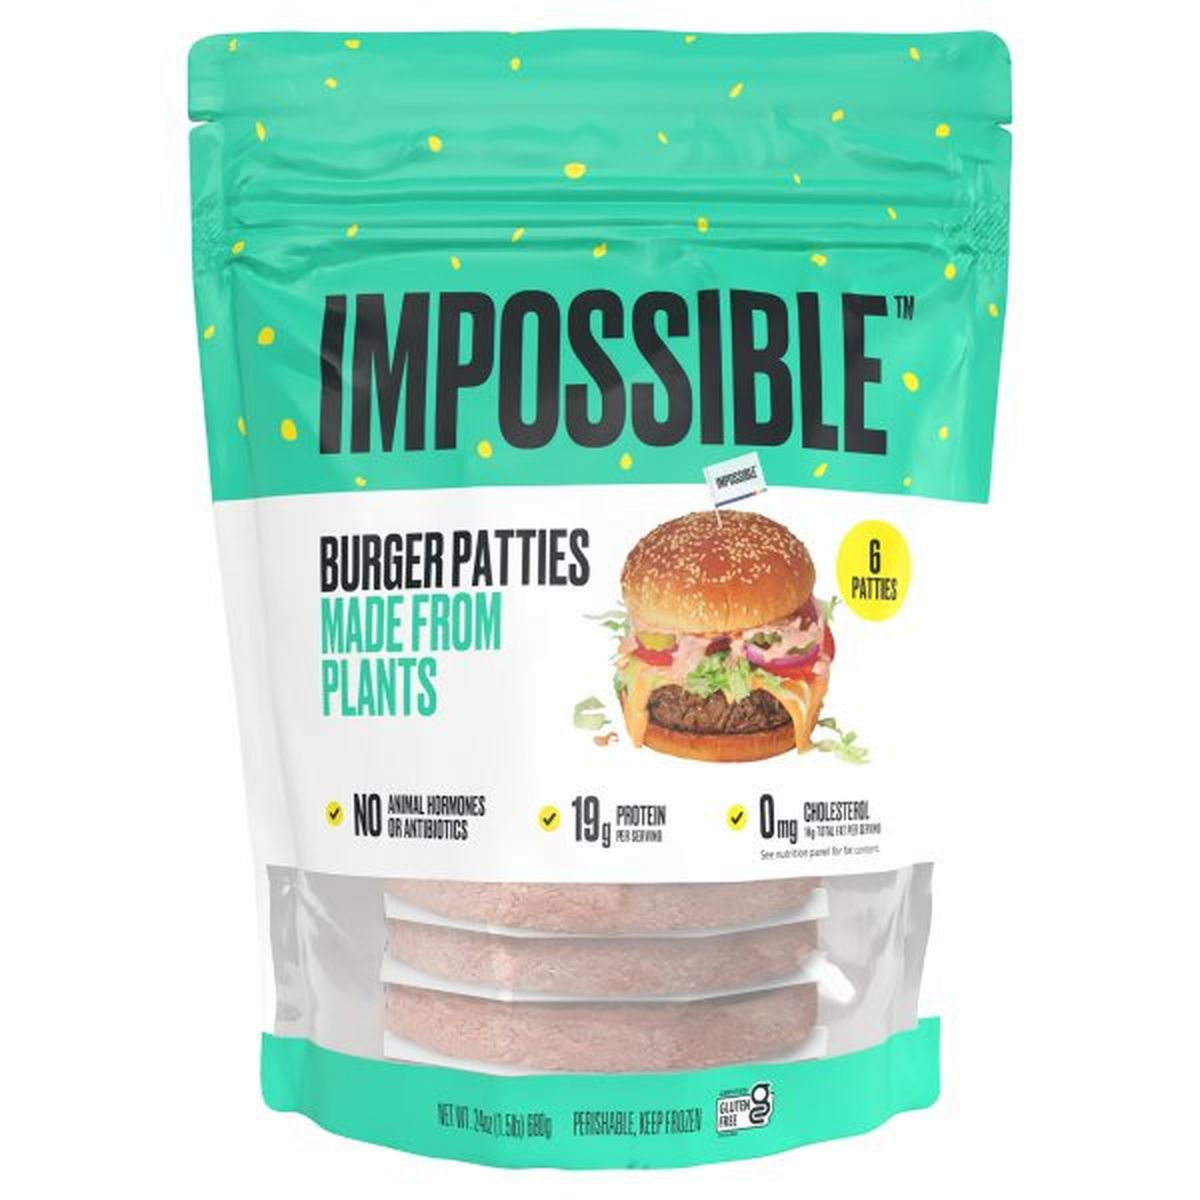 Calories in Impossible Foods Burger Patties, Made from Plants